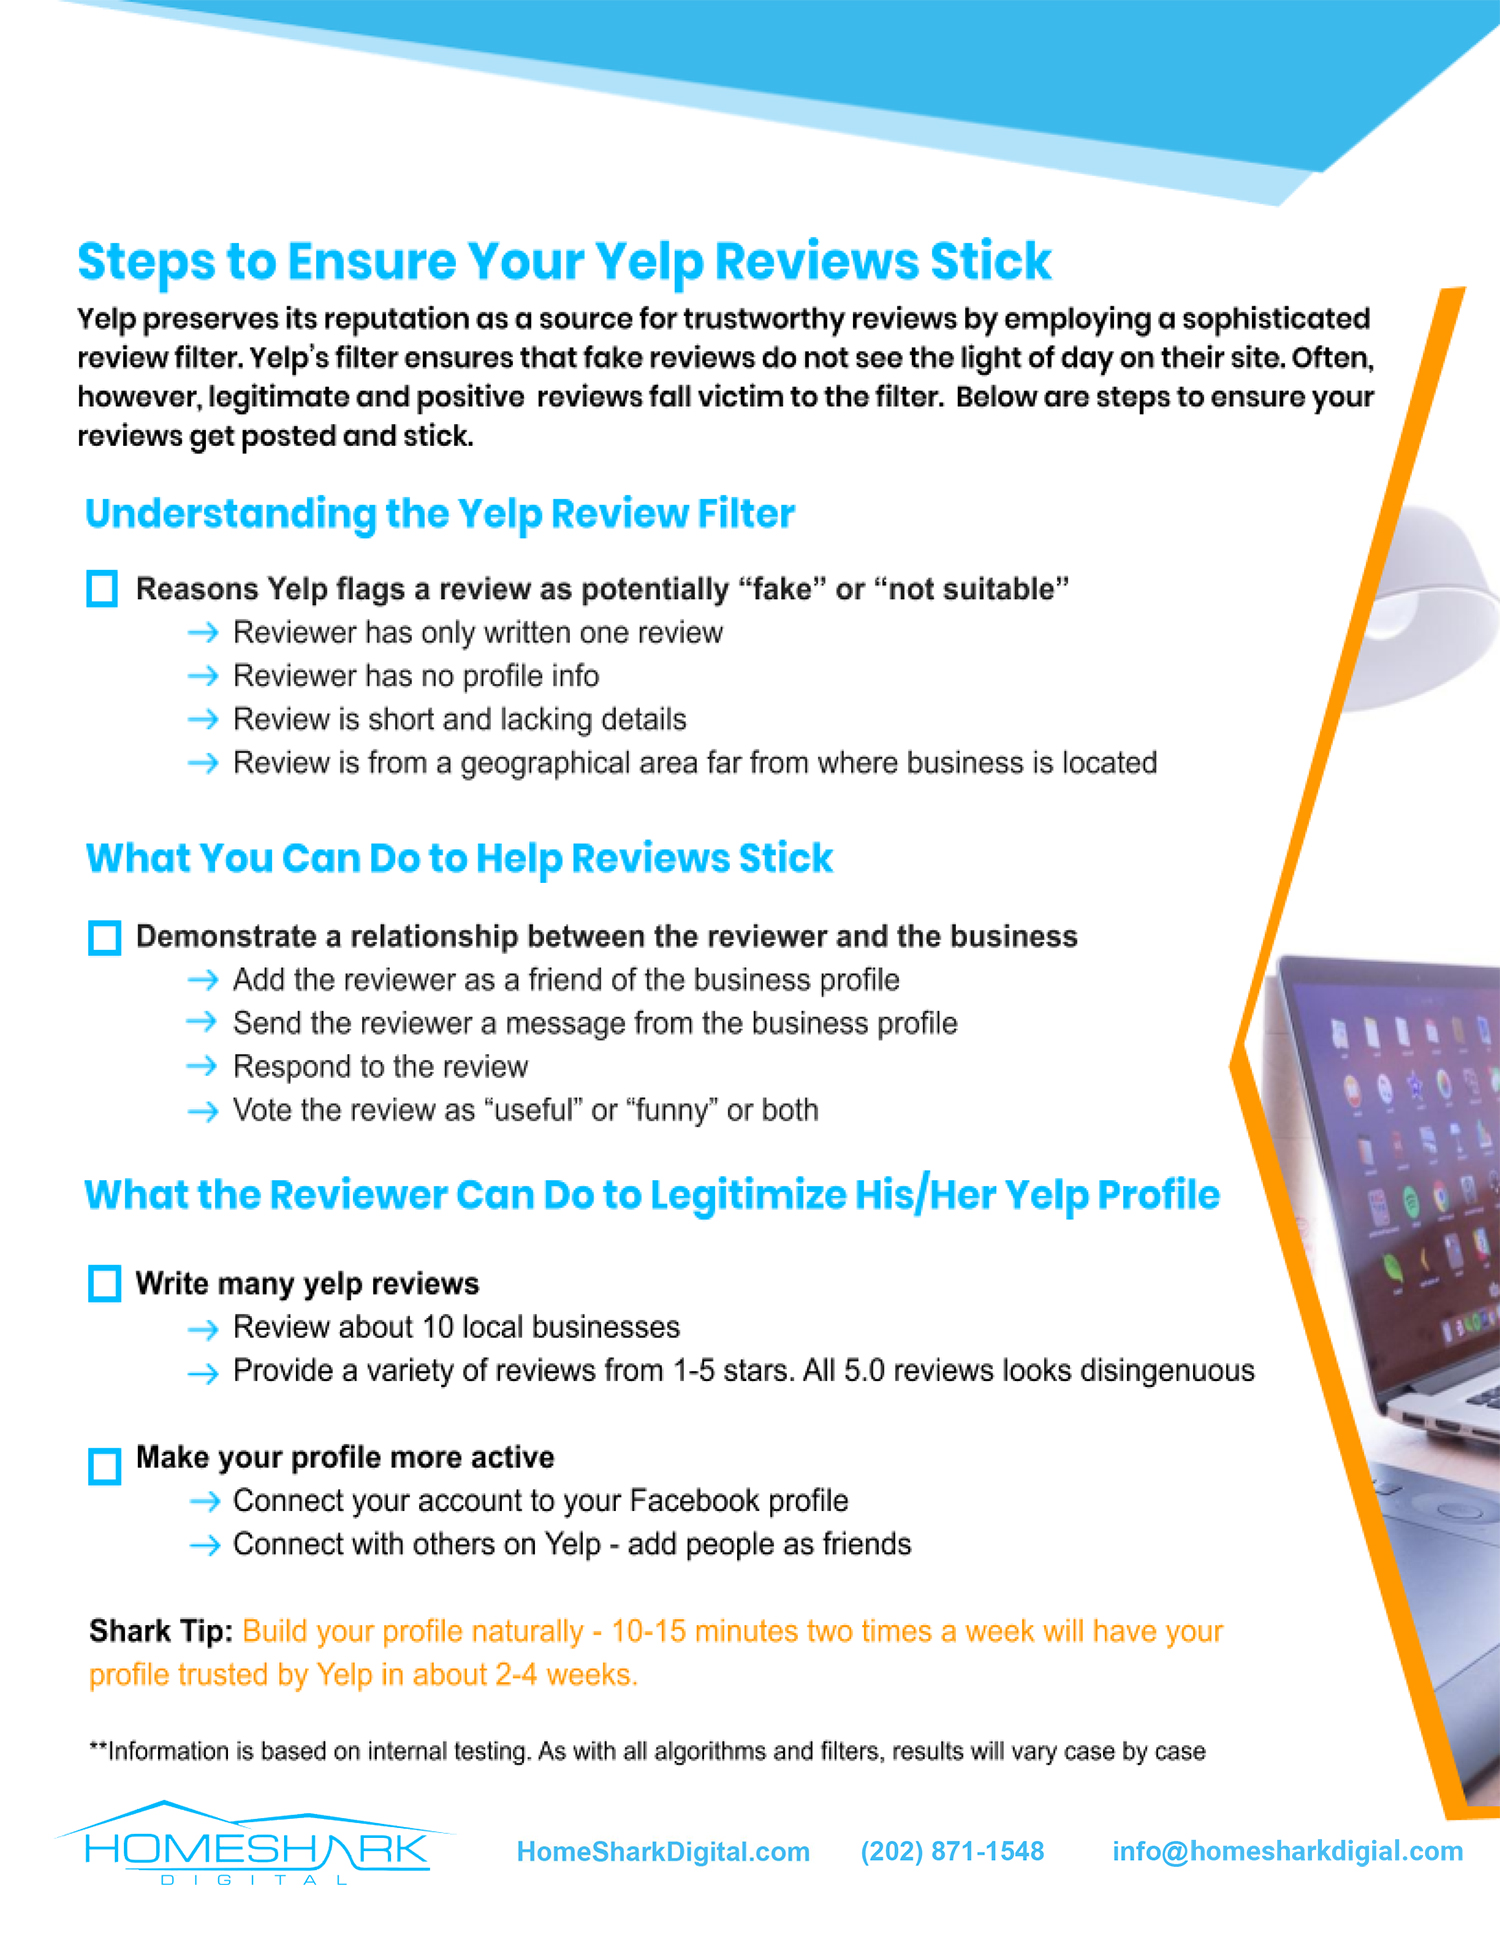 Steps to Ensure Your Yelp Reviews Stick